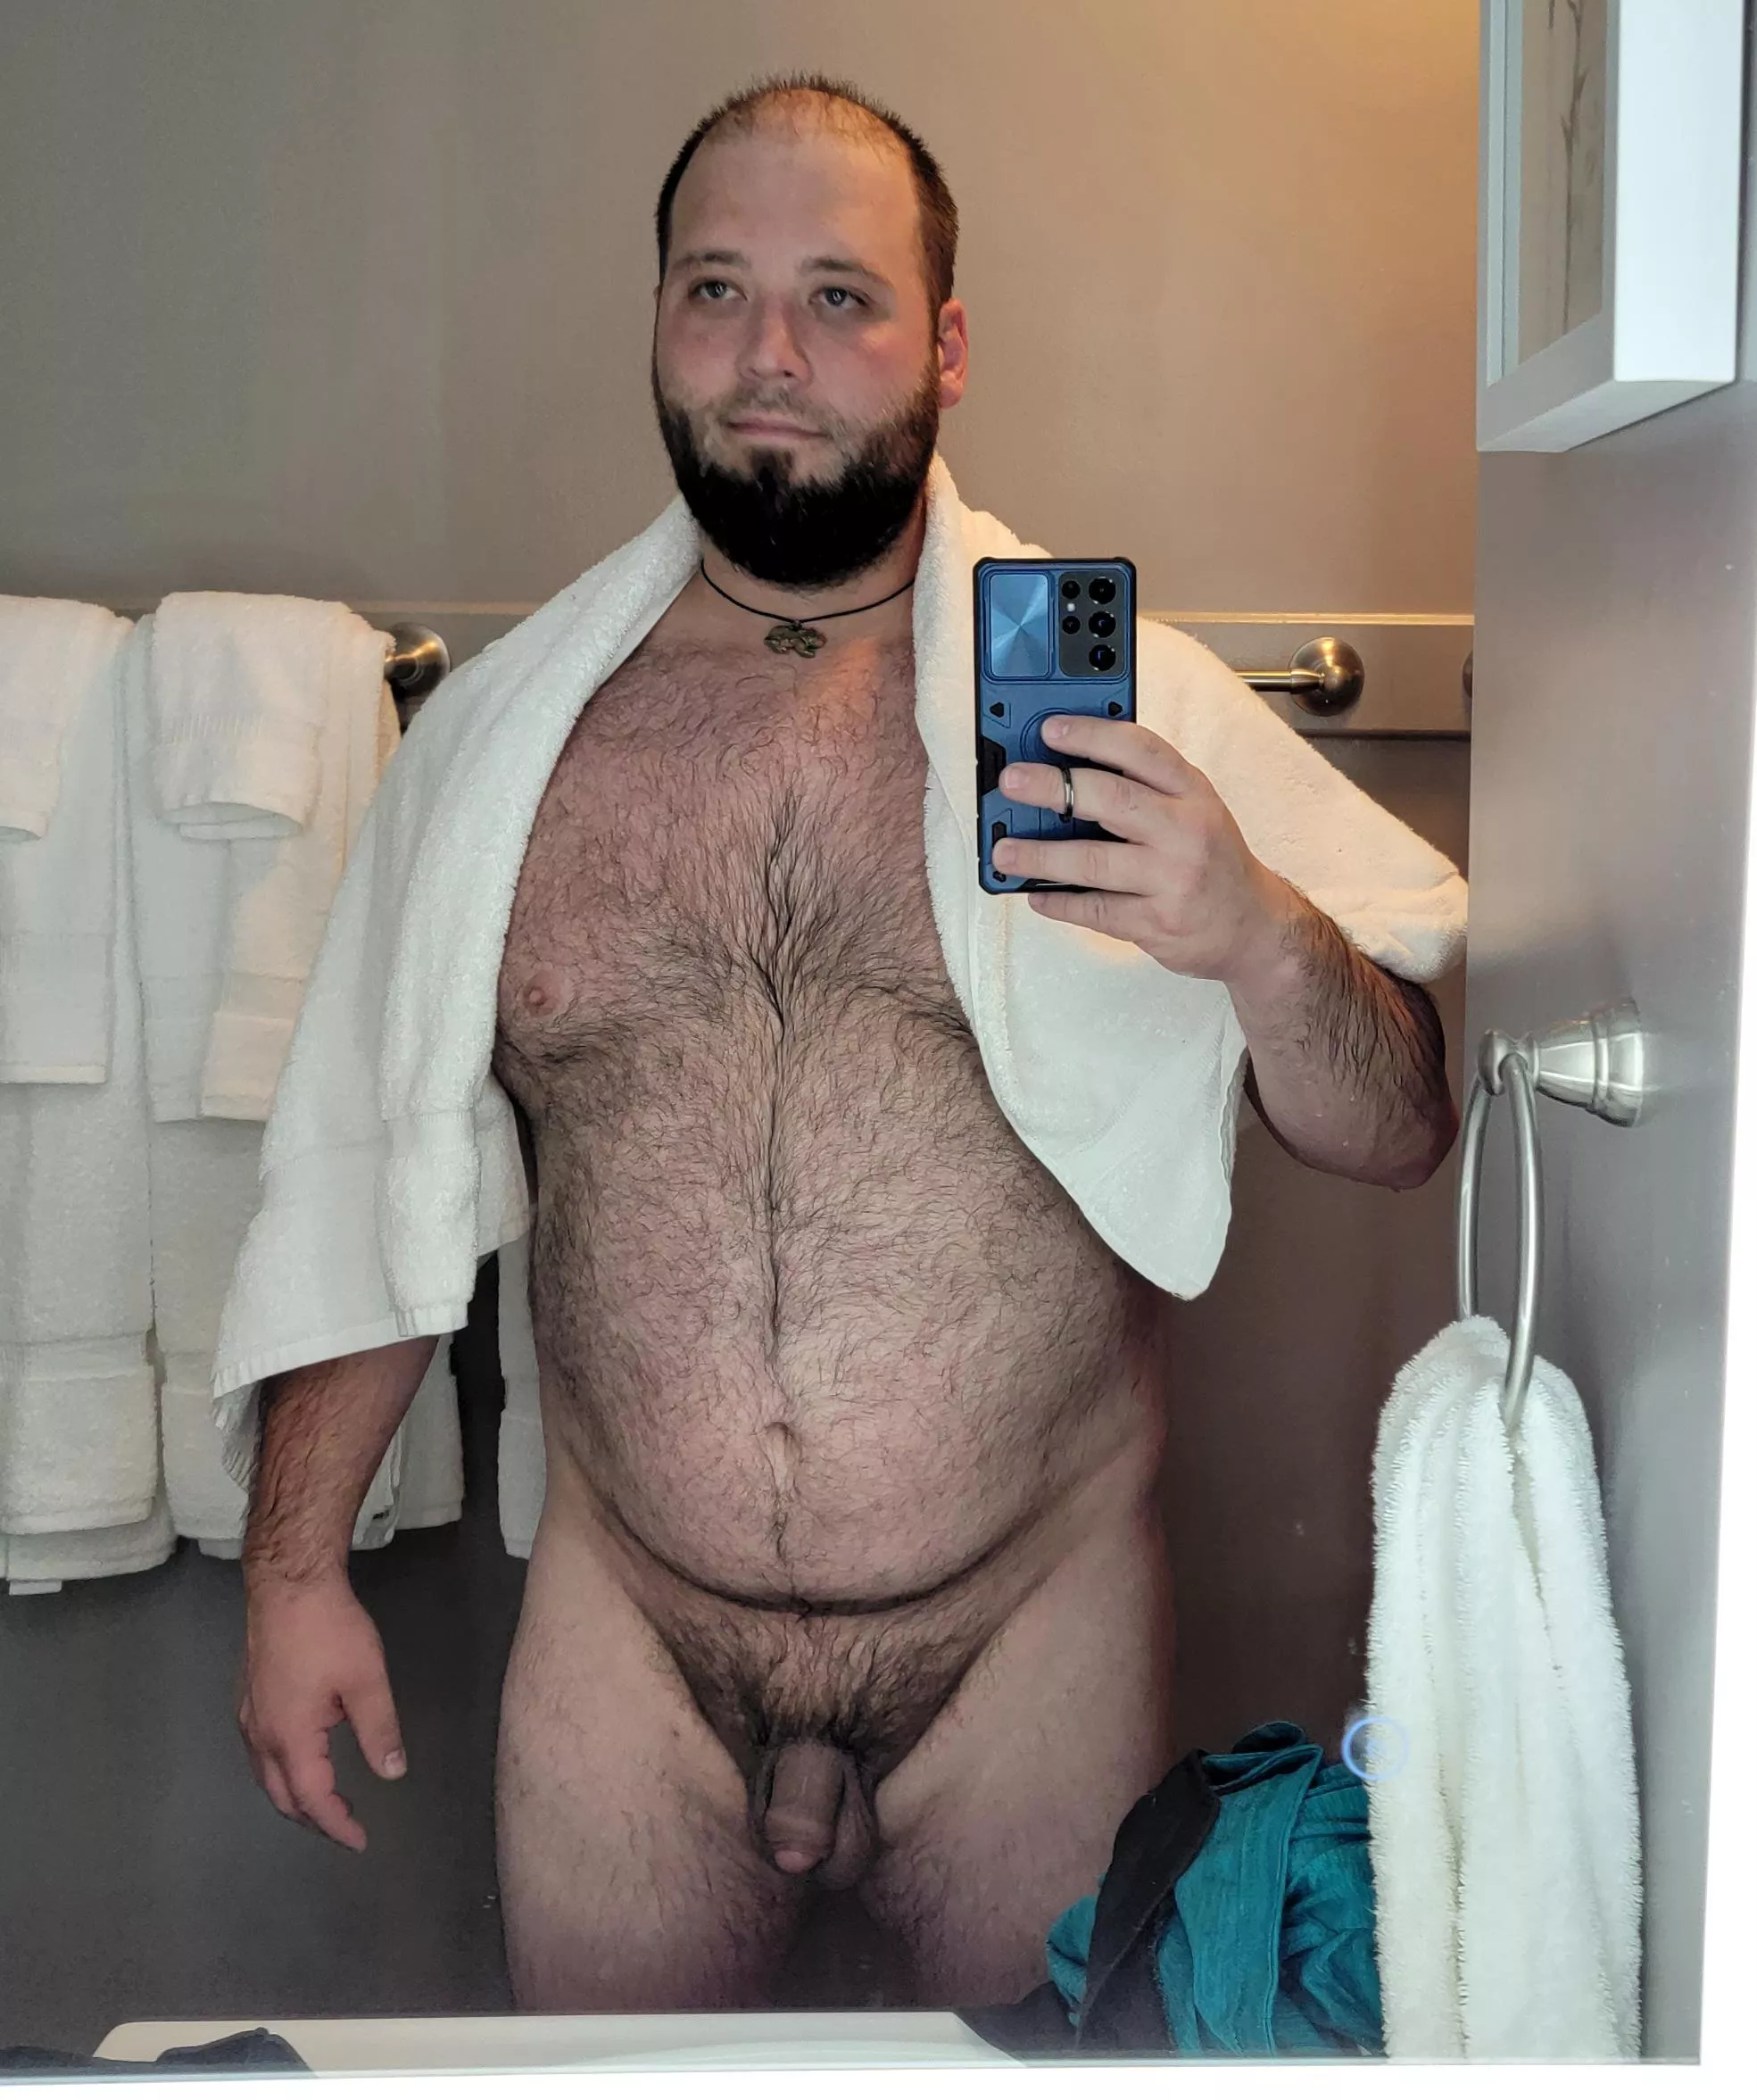 Fresh Outta The Shower Nudes Gaychubs Nude Pics Org